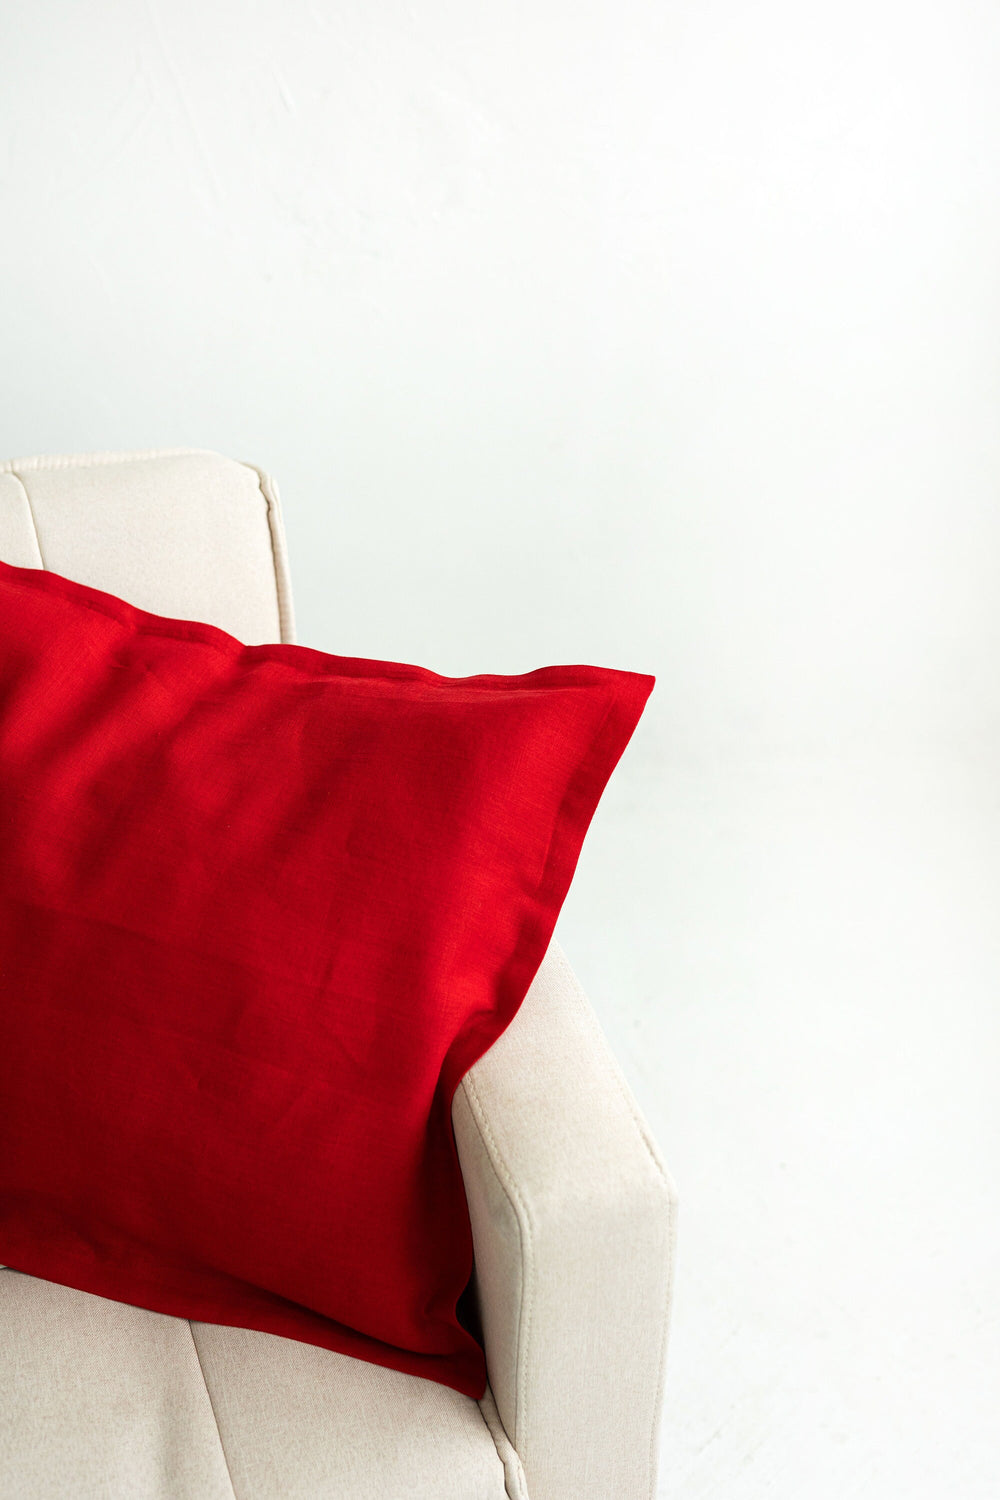 Red Linen Pillowcase On Sofa Side View Daily Linen